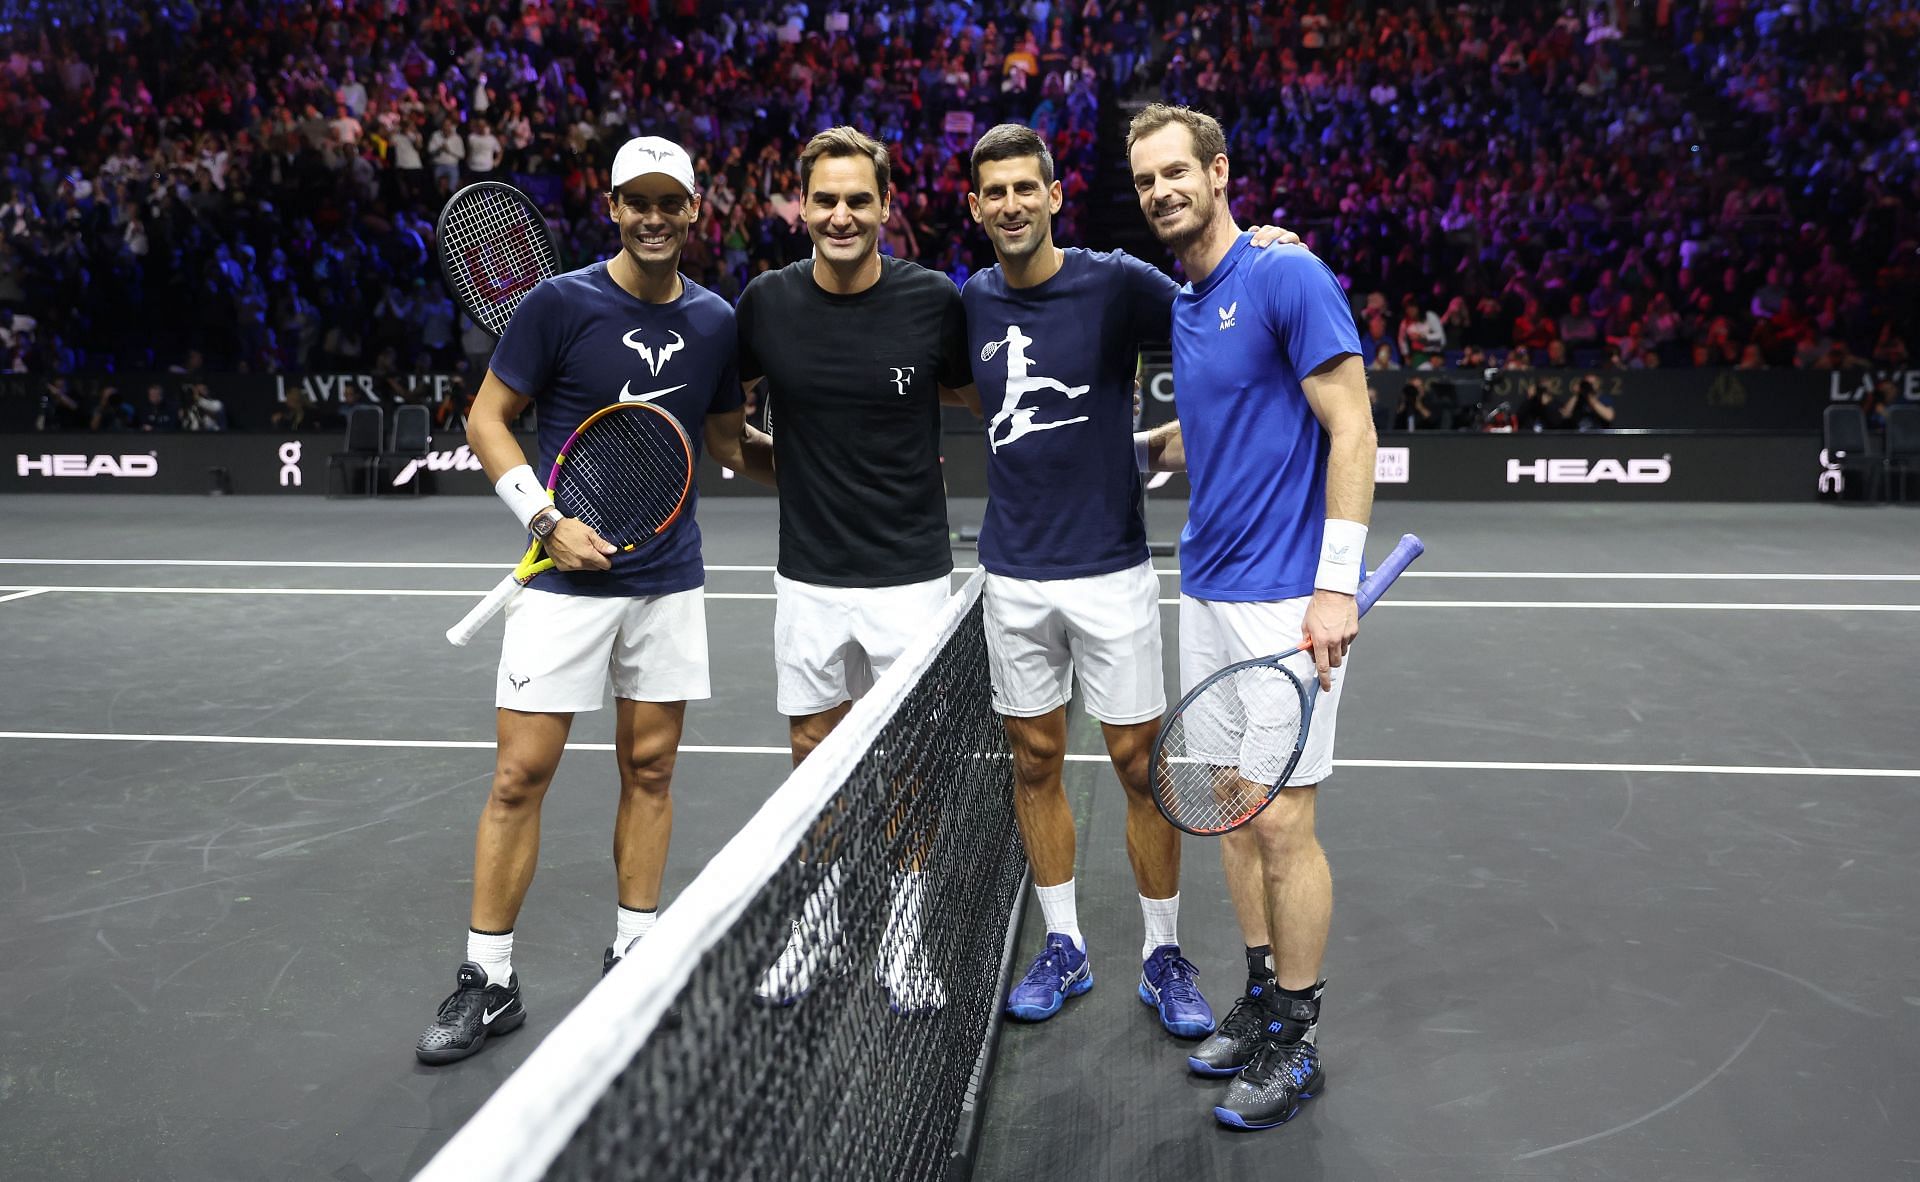 The Big Four pose for the camera at the Laver Cup 2022